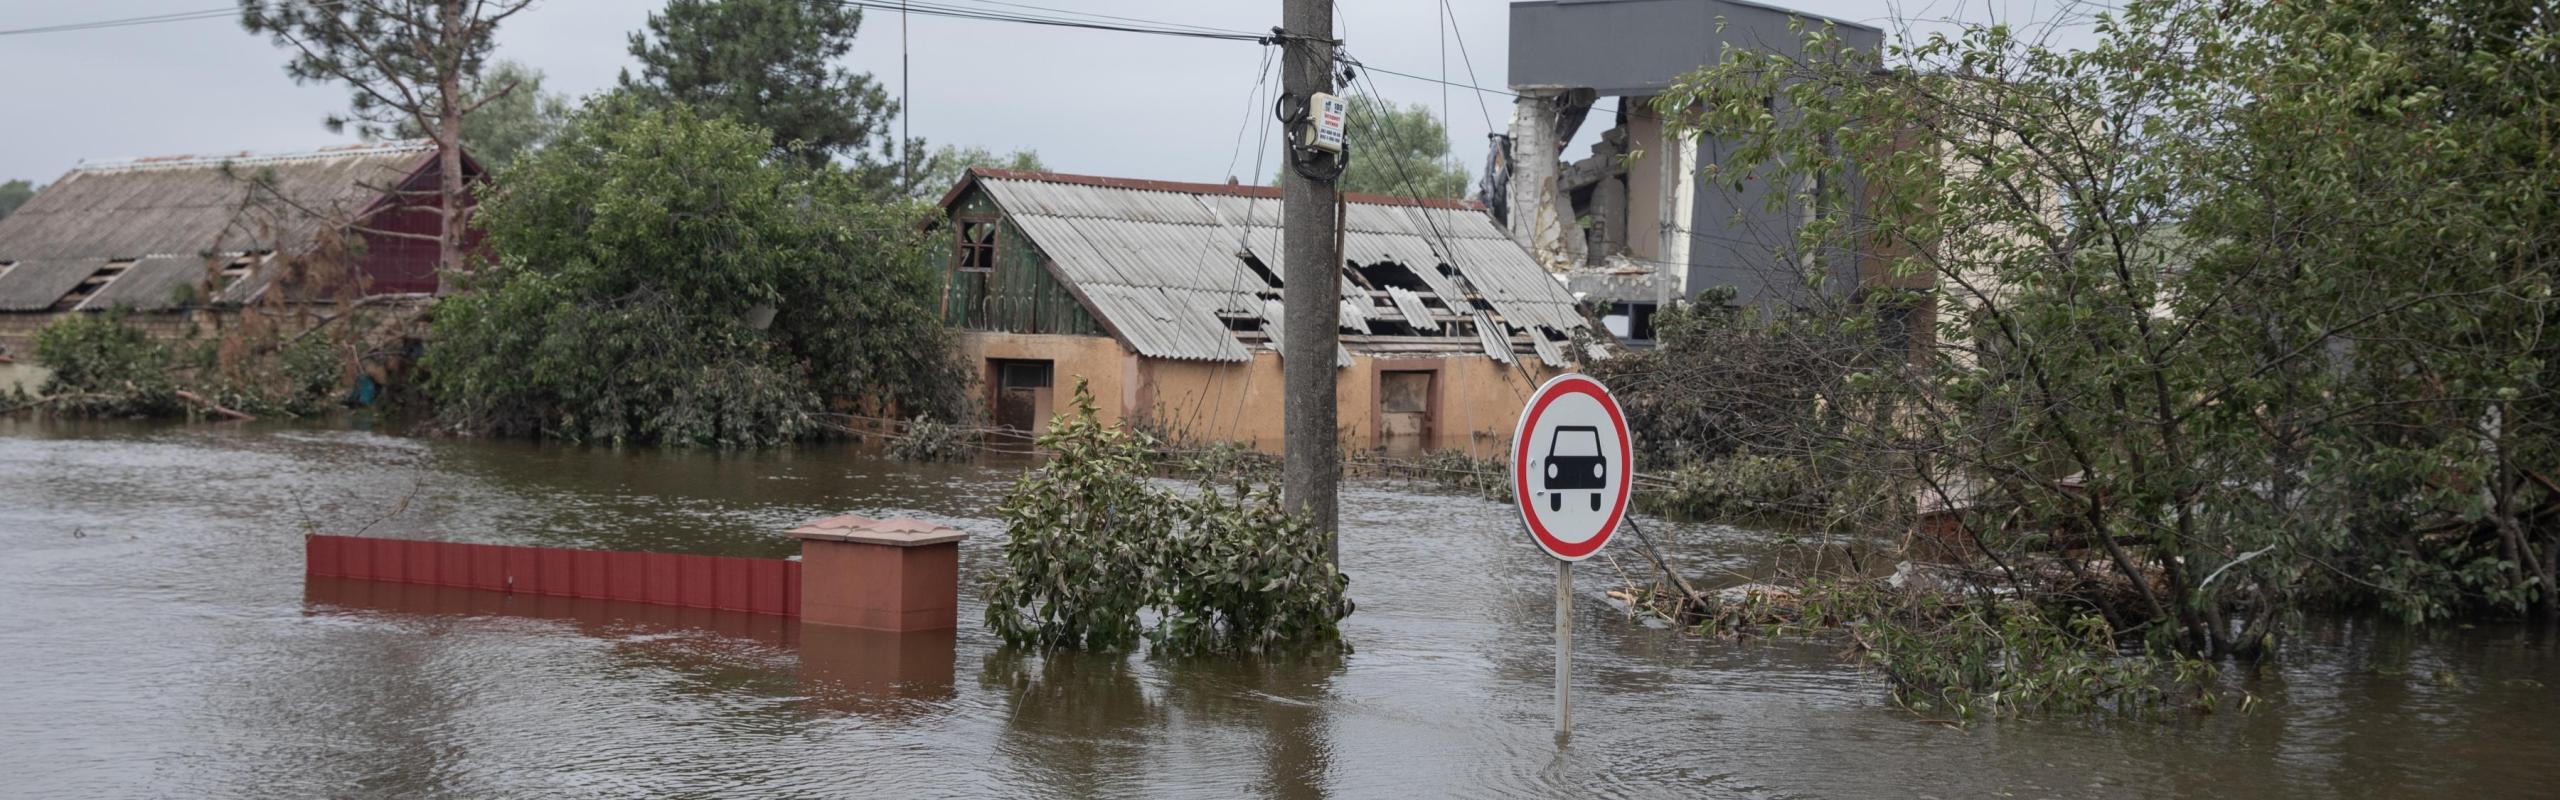 Flooded streets of Kherson, Ukraine following the breaching of the Kakhovka dam in June 2023. The disaster killed dozens and destroyed agricultural infrastructure over a wide area.